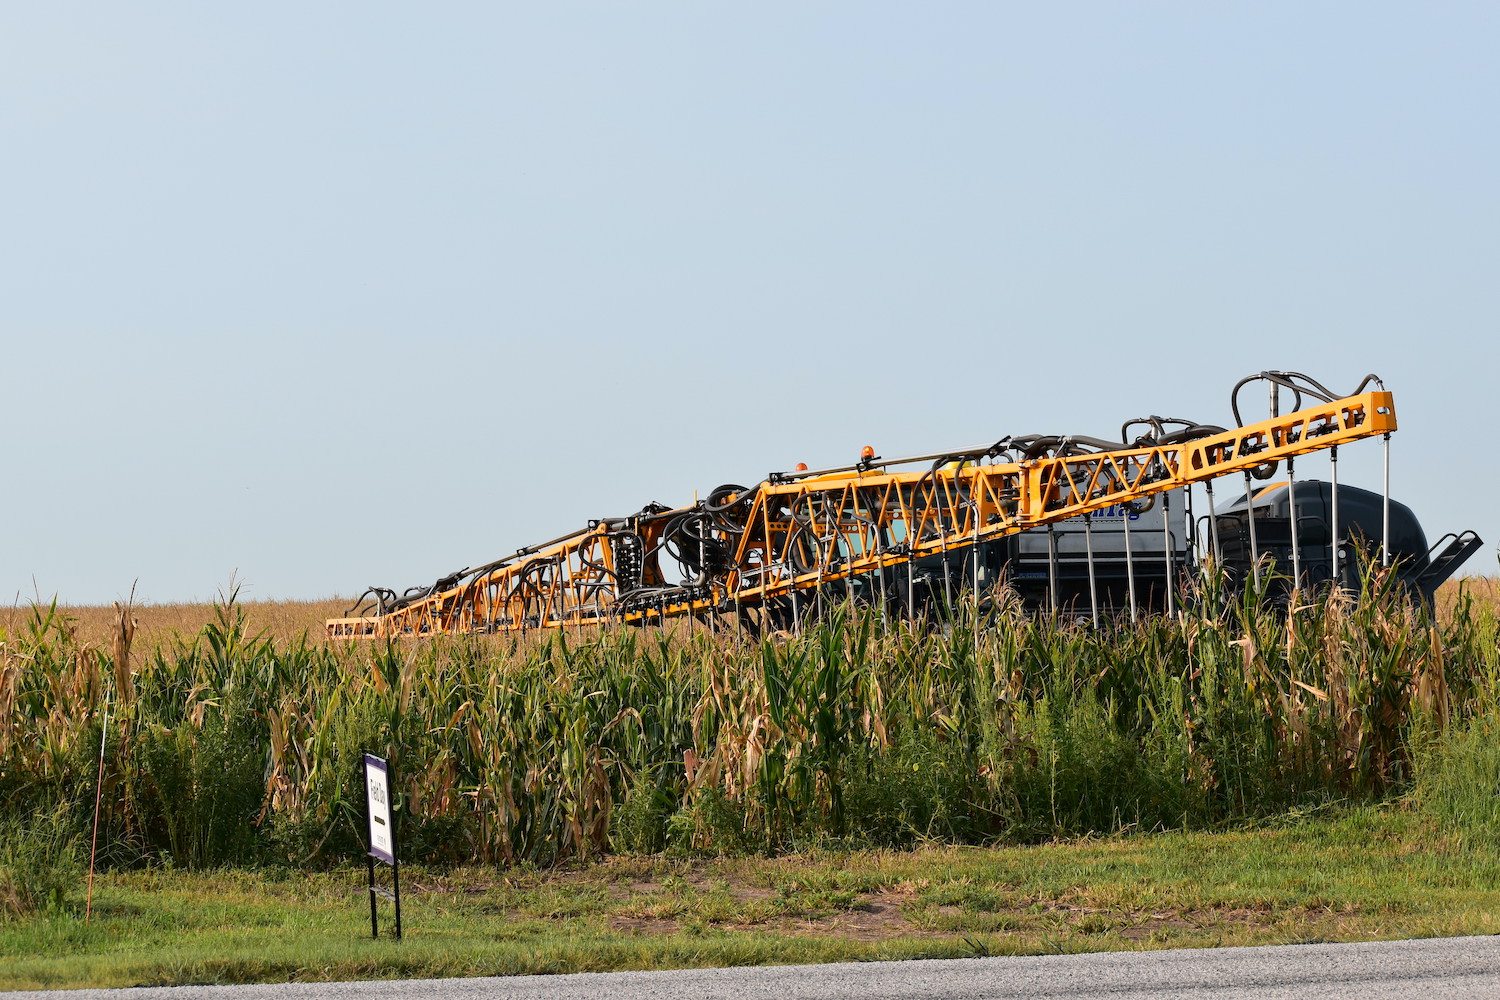 A large interseeder drives through a corn field at the Flickner Farm